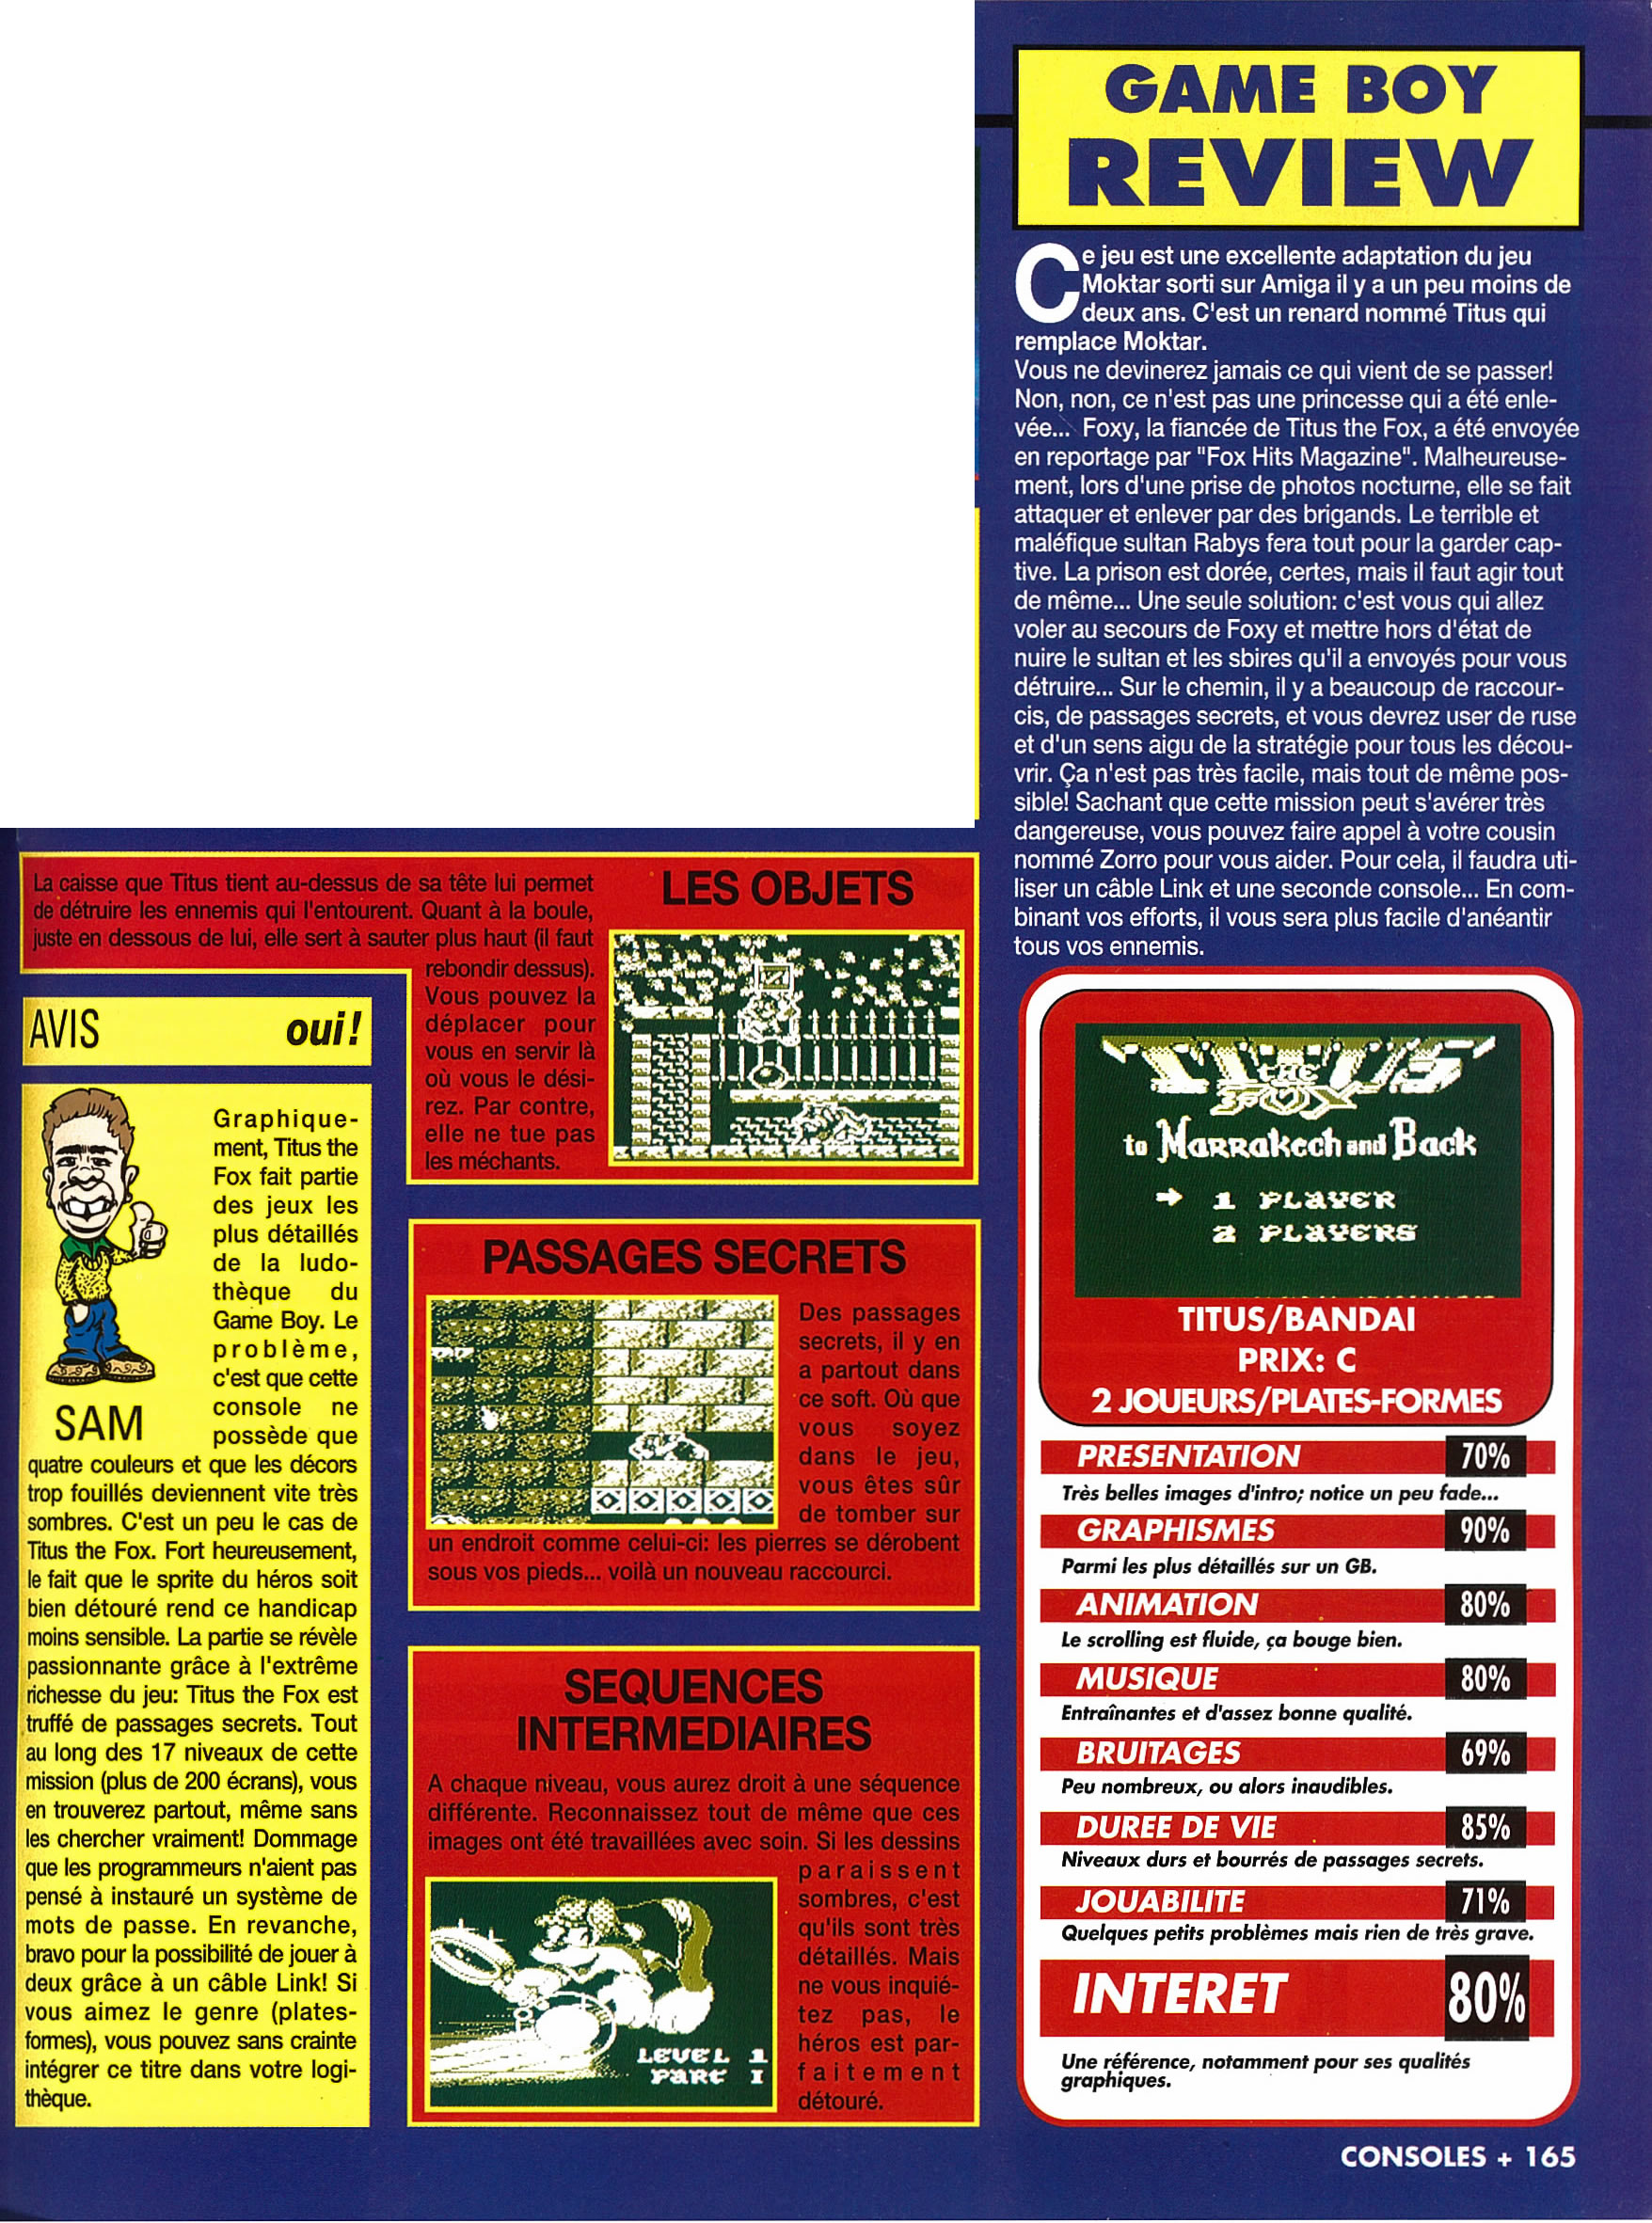 tests/773/Consoles + 023 - Page 165 (septembre 1993).jpg